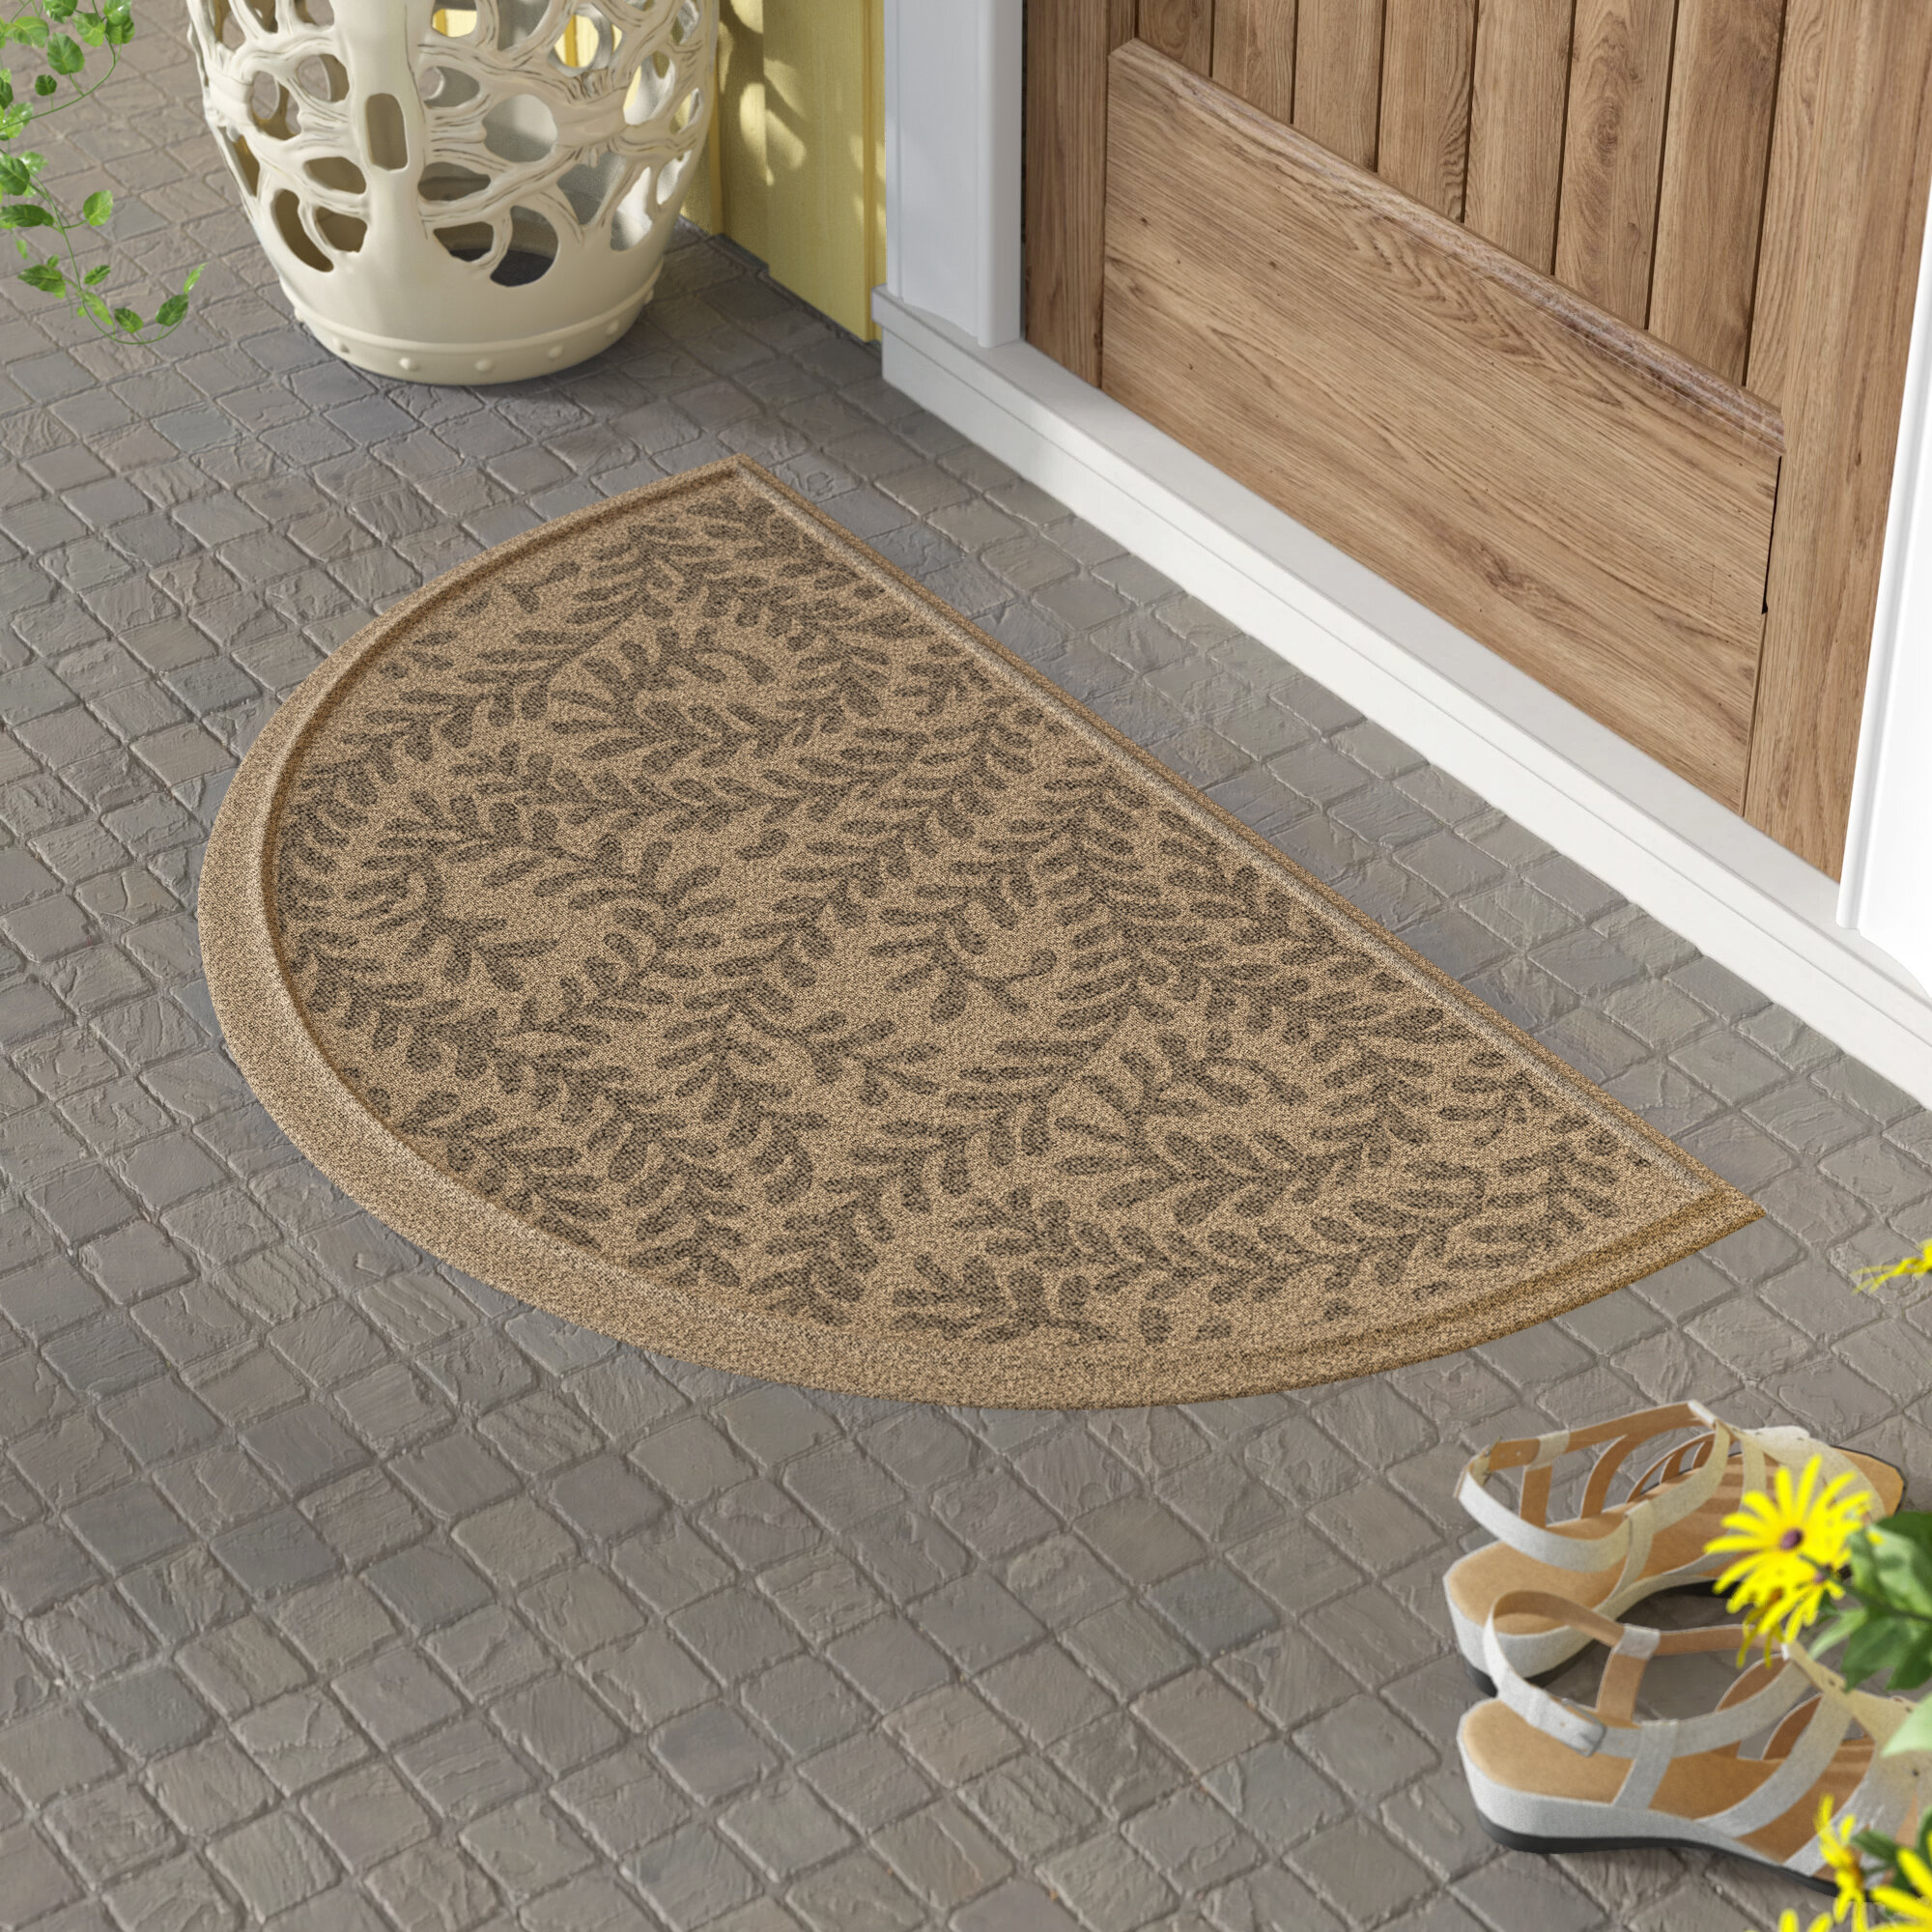 Mud Scrubbing Entrance Doormat Throw with Scrapers Brown Non Tracking 24 x 36 Mind Reader Ultimate Greeting Mat